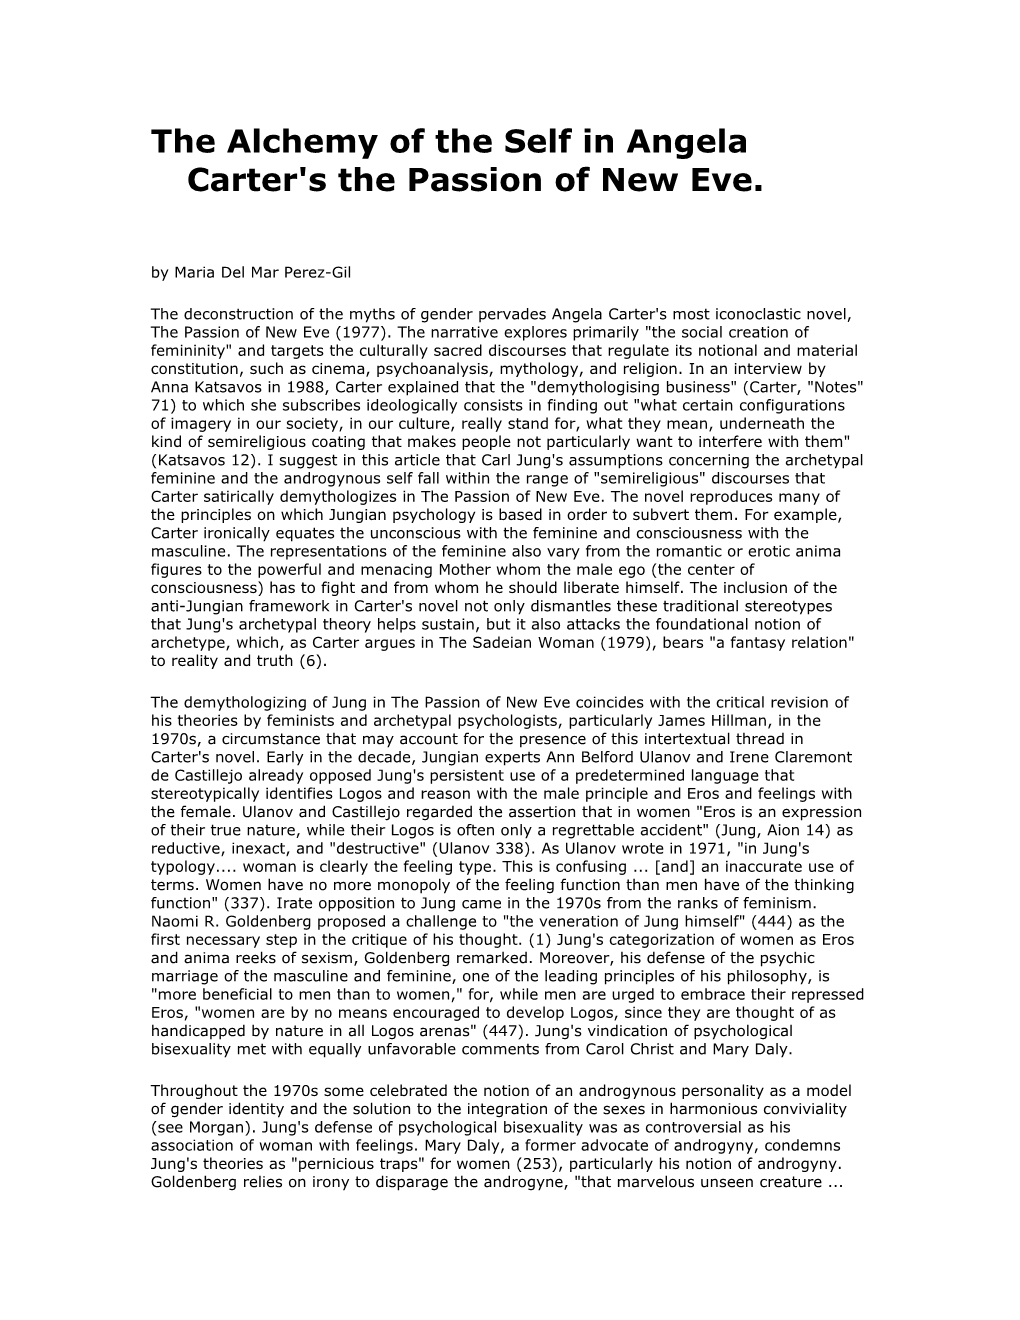 The Alchemy of the Self in Angela Carter's the Passion of New Eve